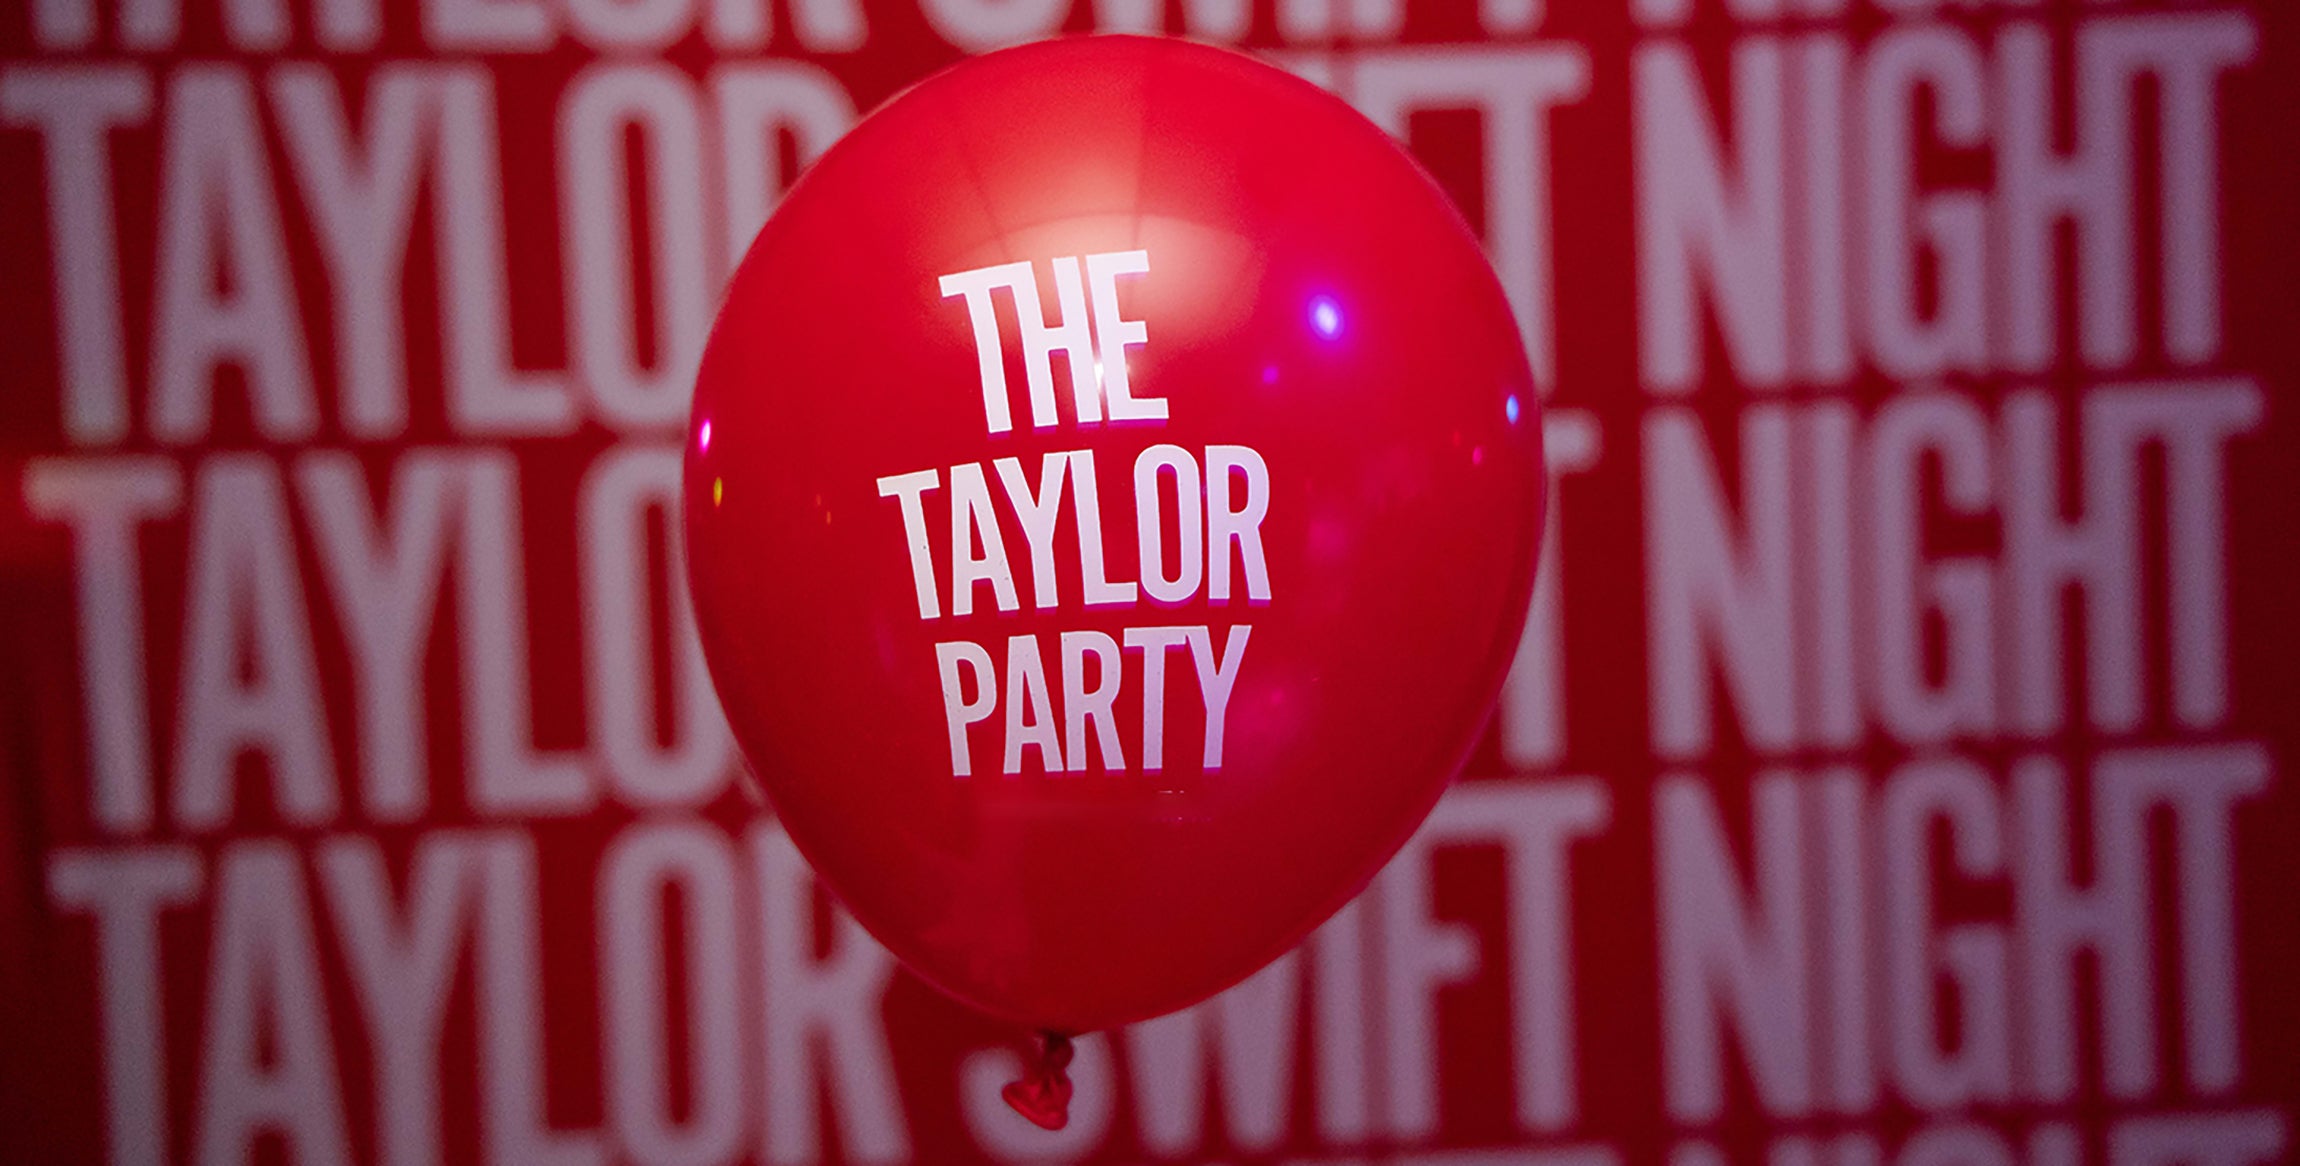 The Taylor Party: Taylor Swift Night at TempleLive Wichita